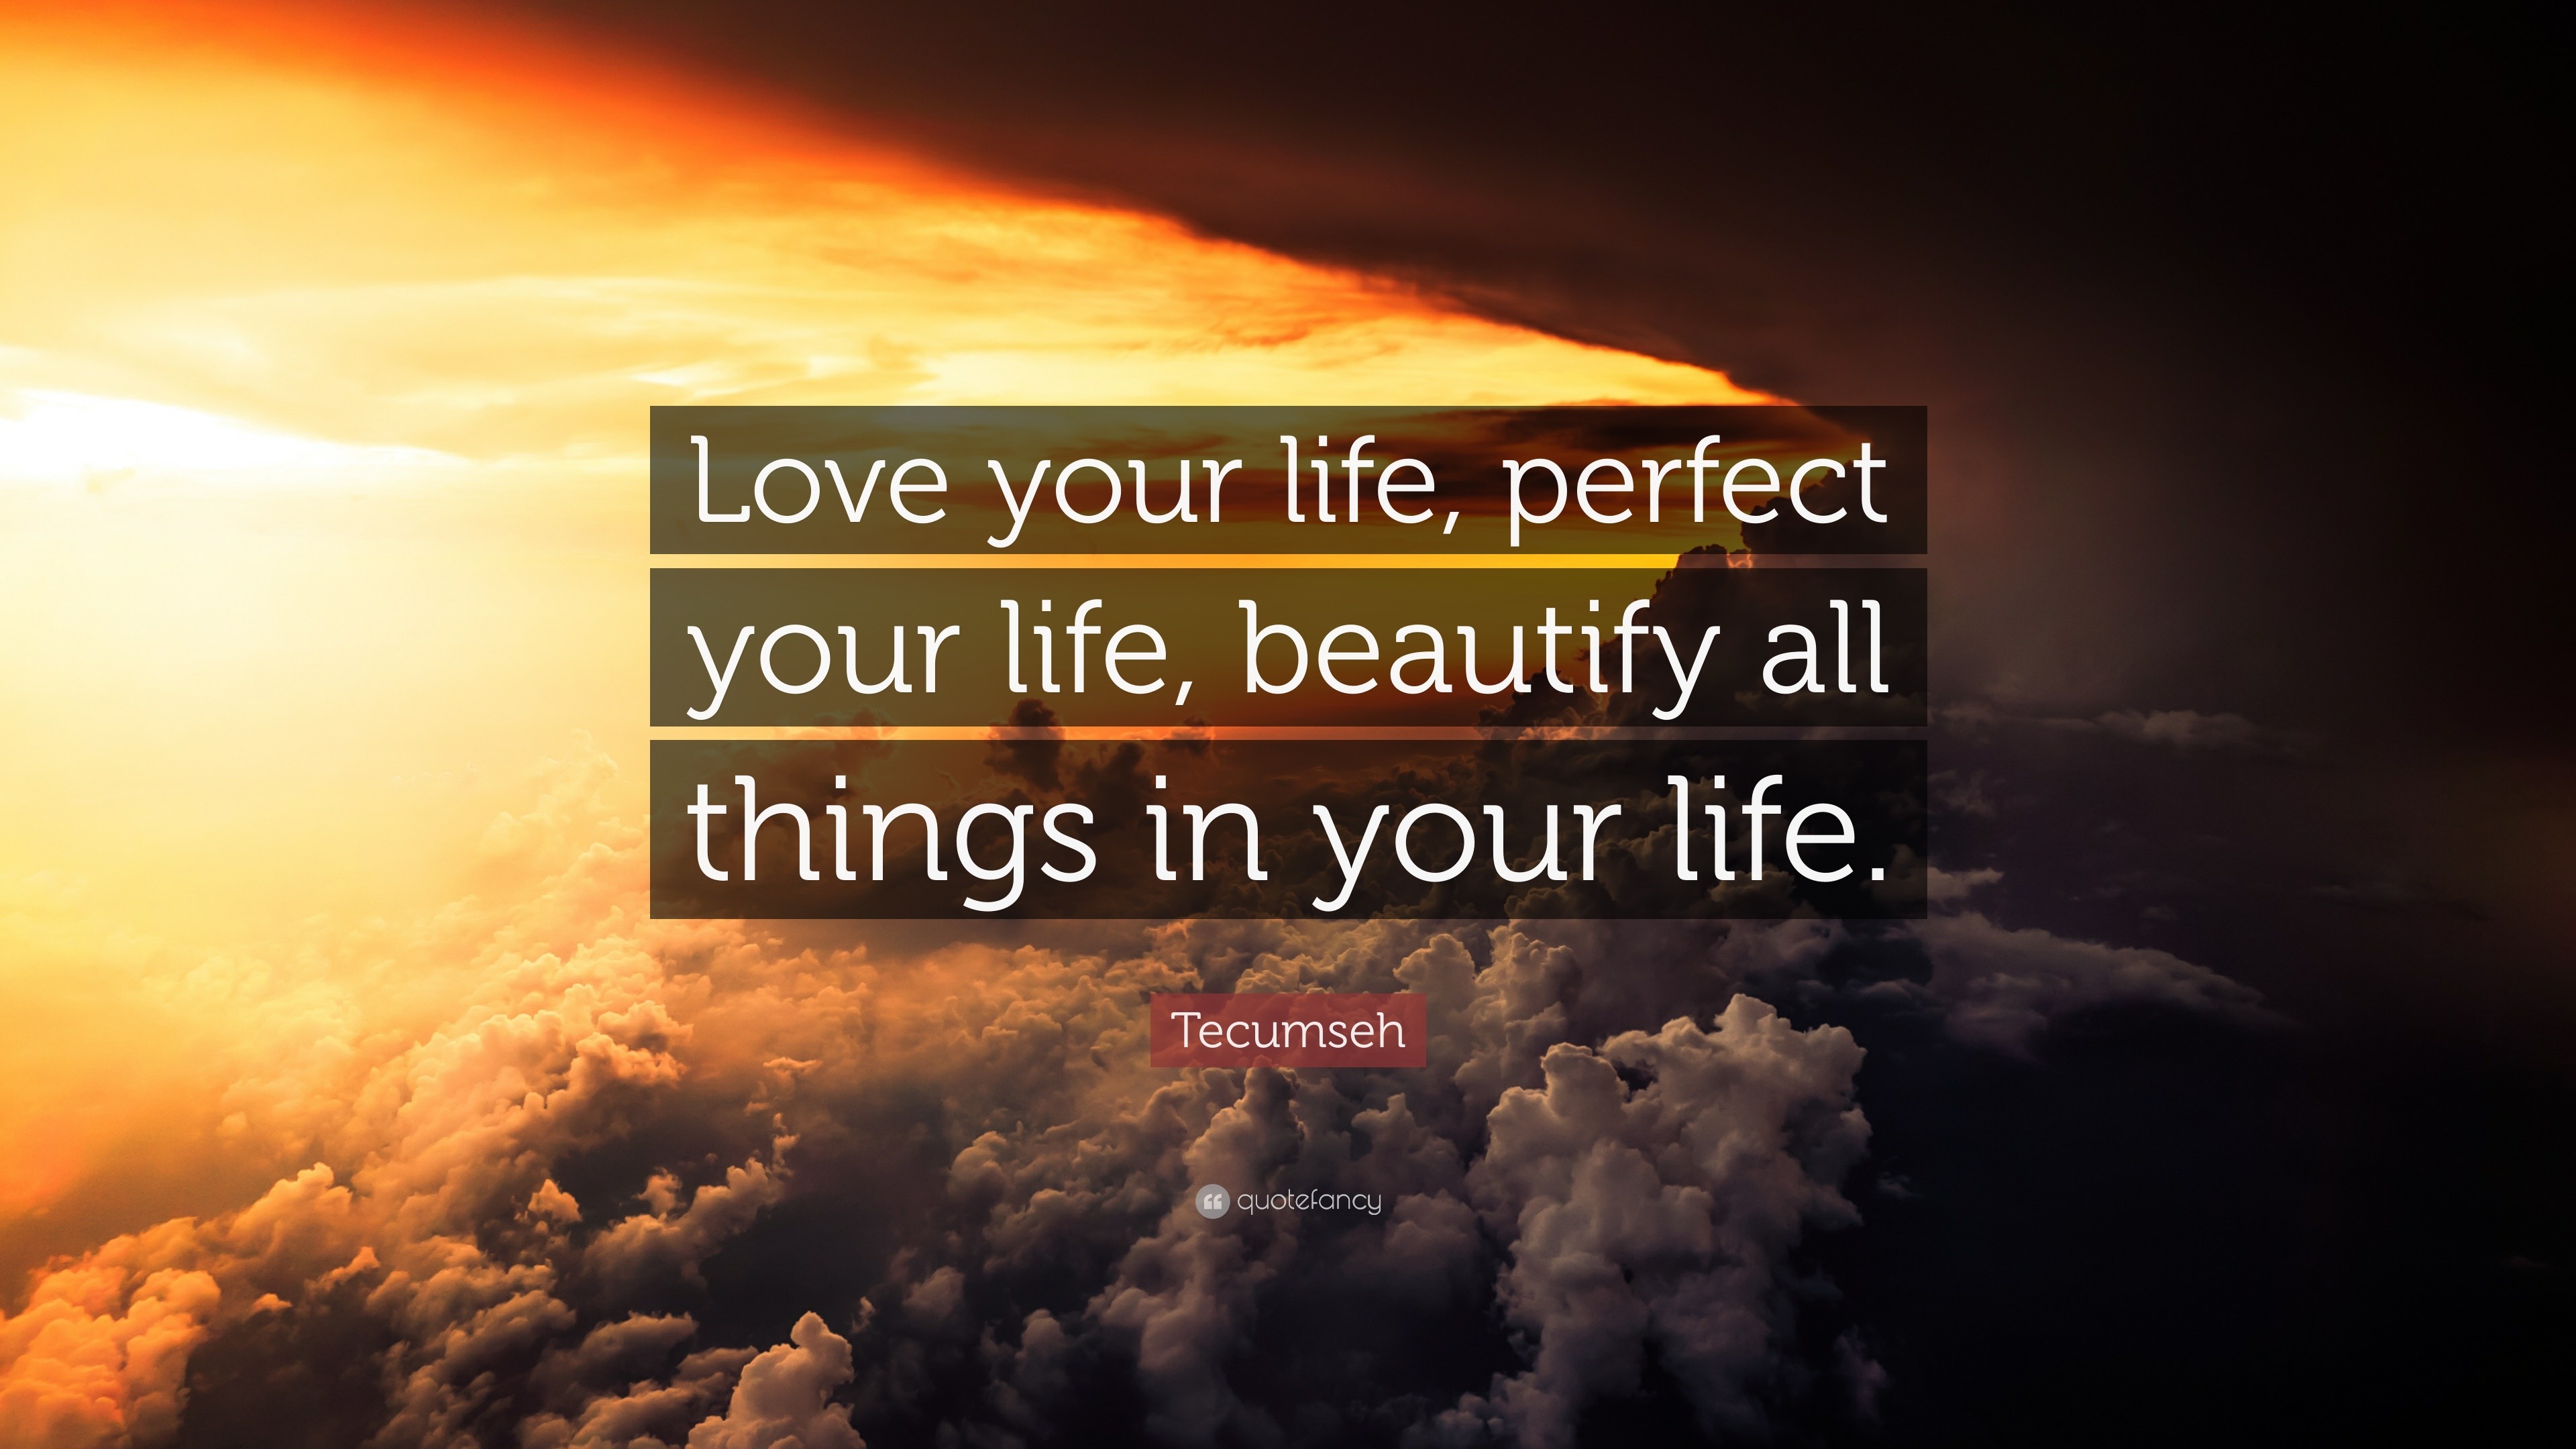 Tecumseh Quote: “Love your life, perfect your life, beautify all things